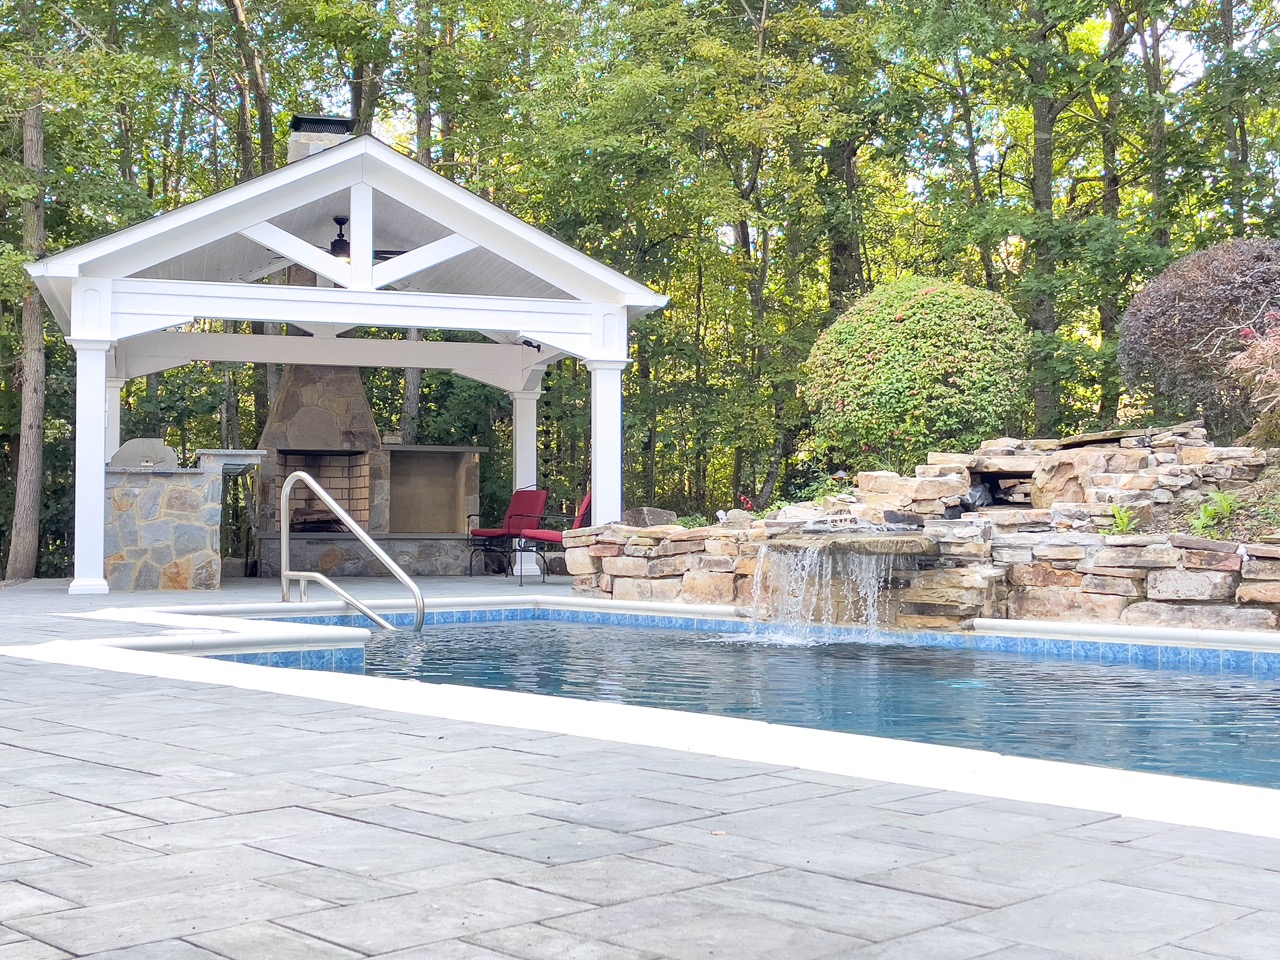 Pool, pavilion and outdoor kitchen with paver patio | Richmond, VA | Cleanstone Construction | winter maintenance